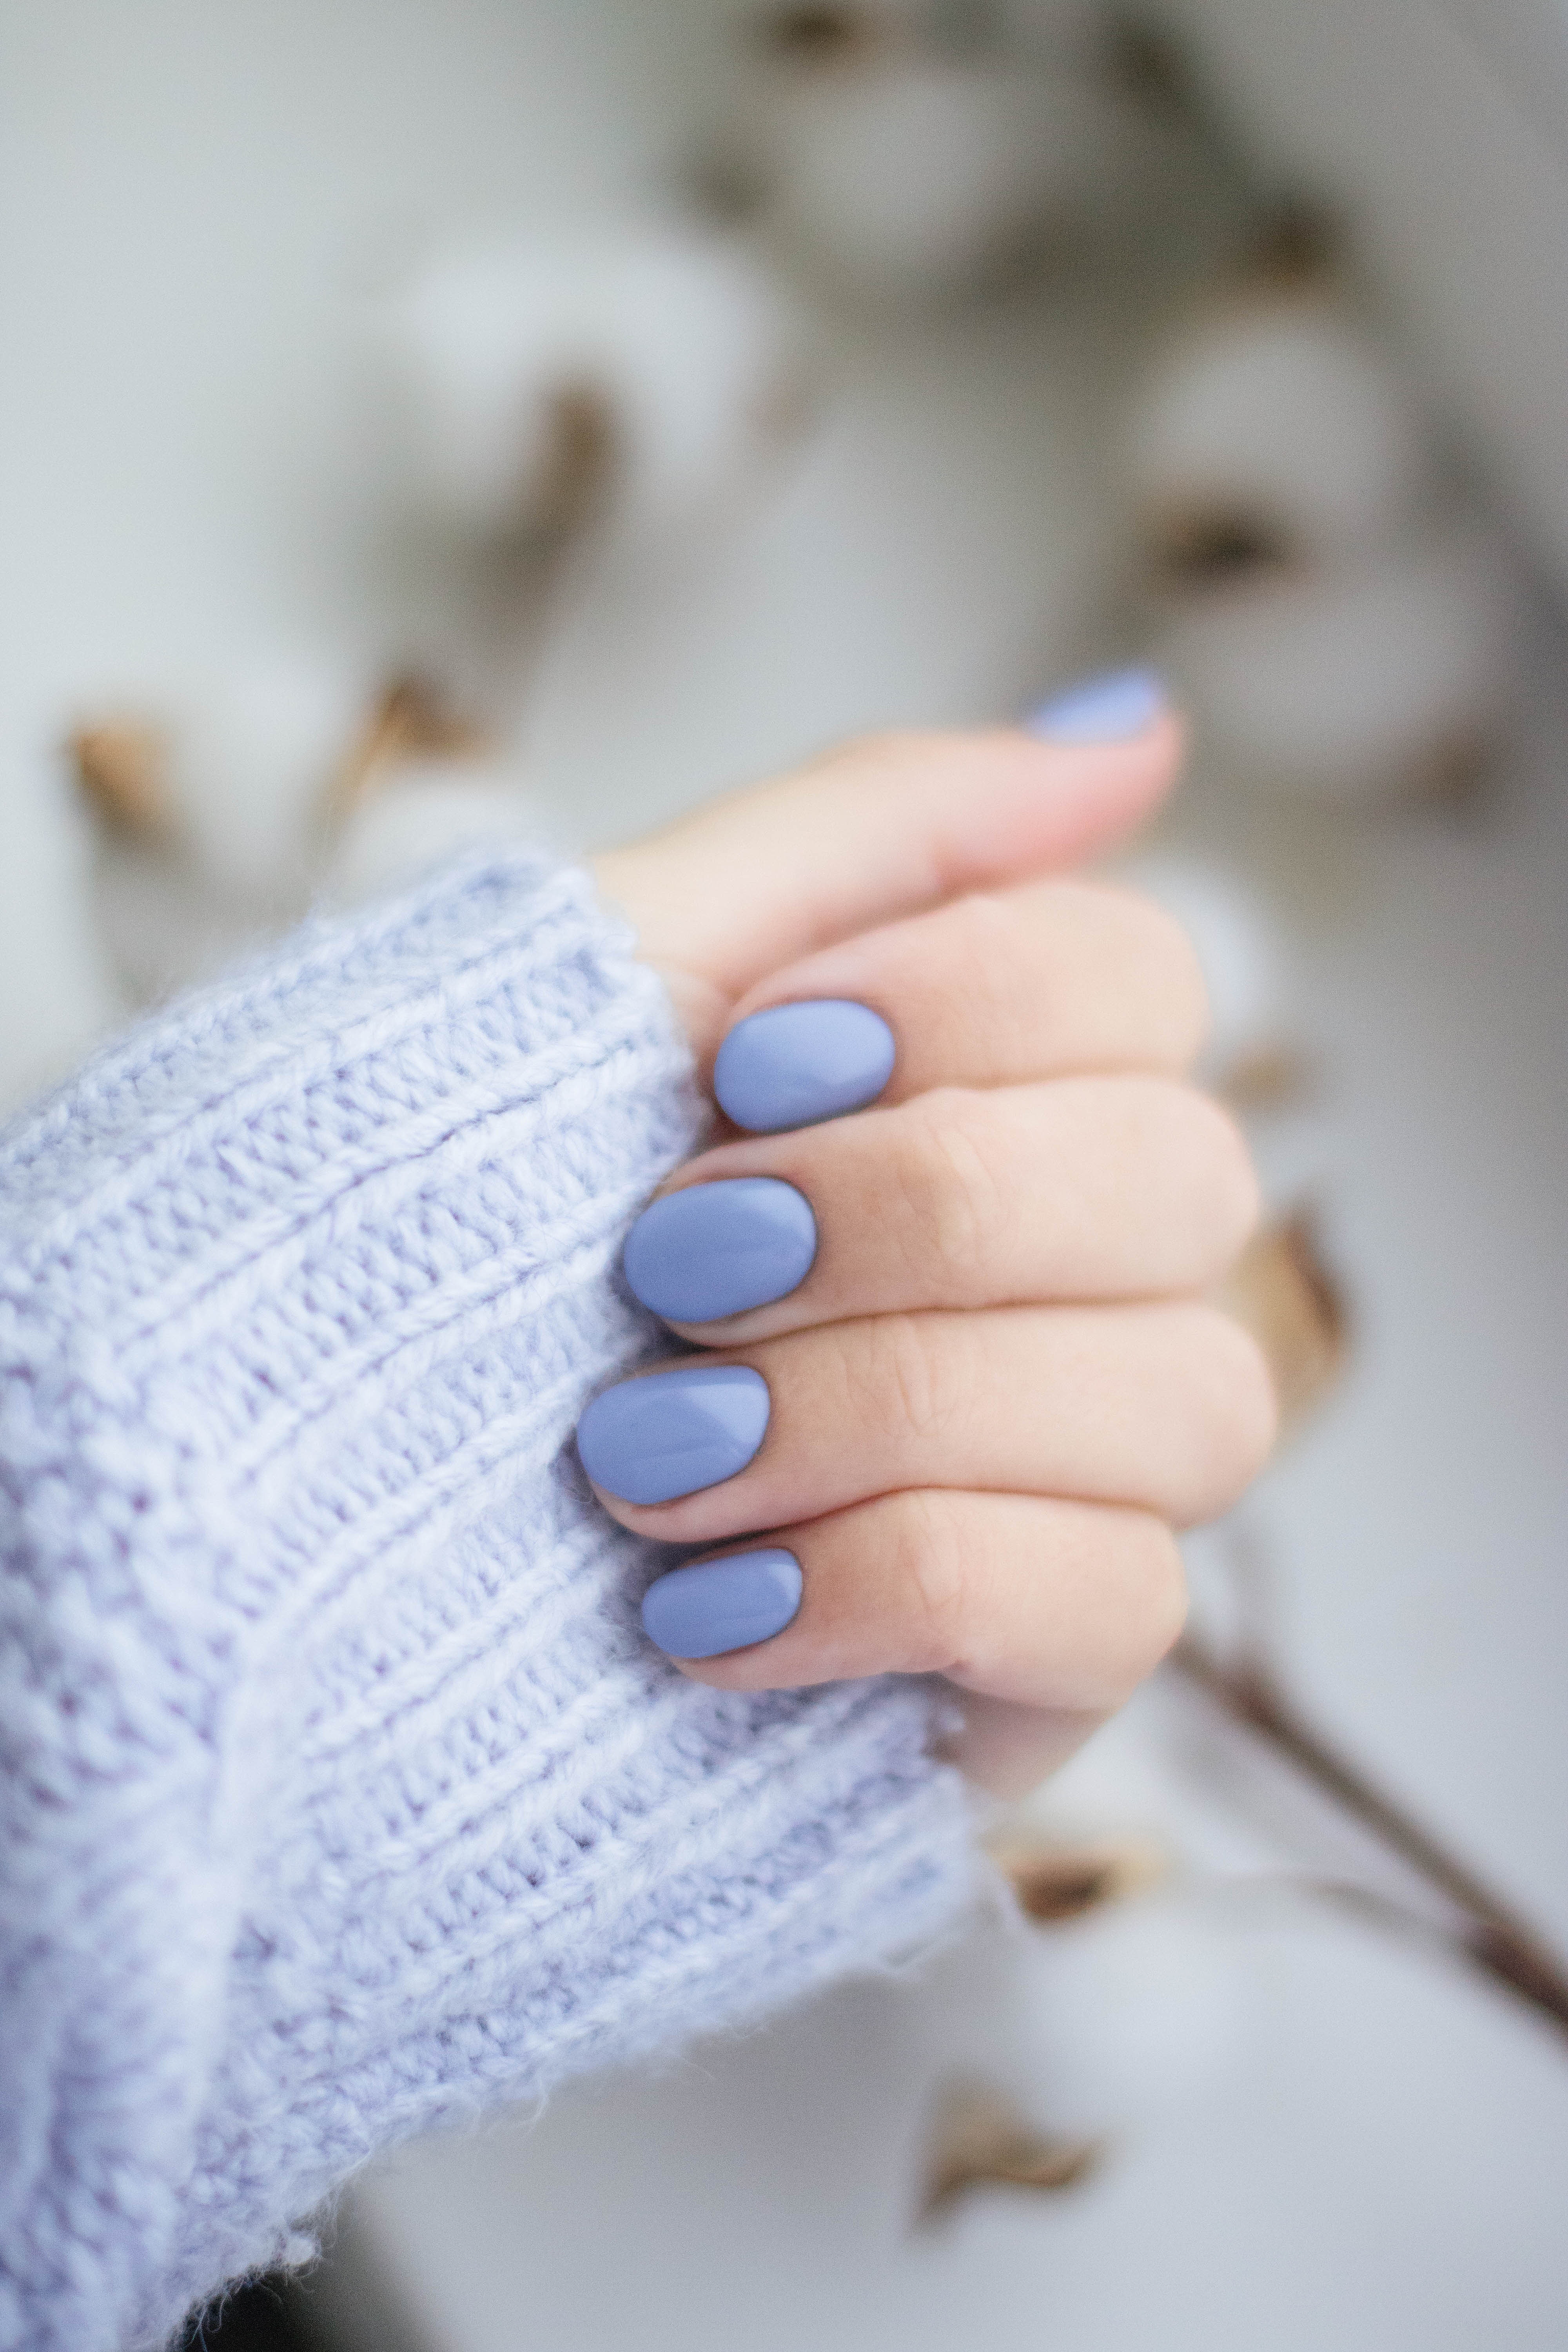 A woman shows off her manicure nail art | Source: Pexels